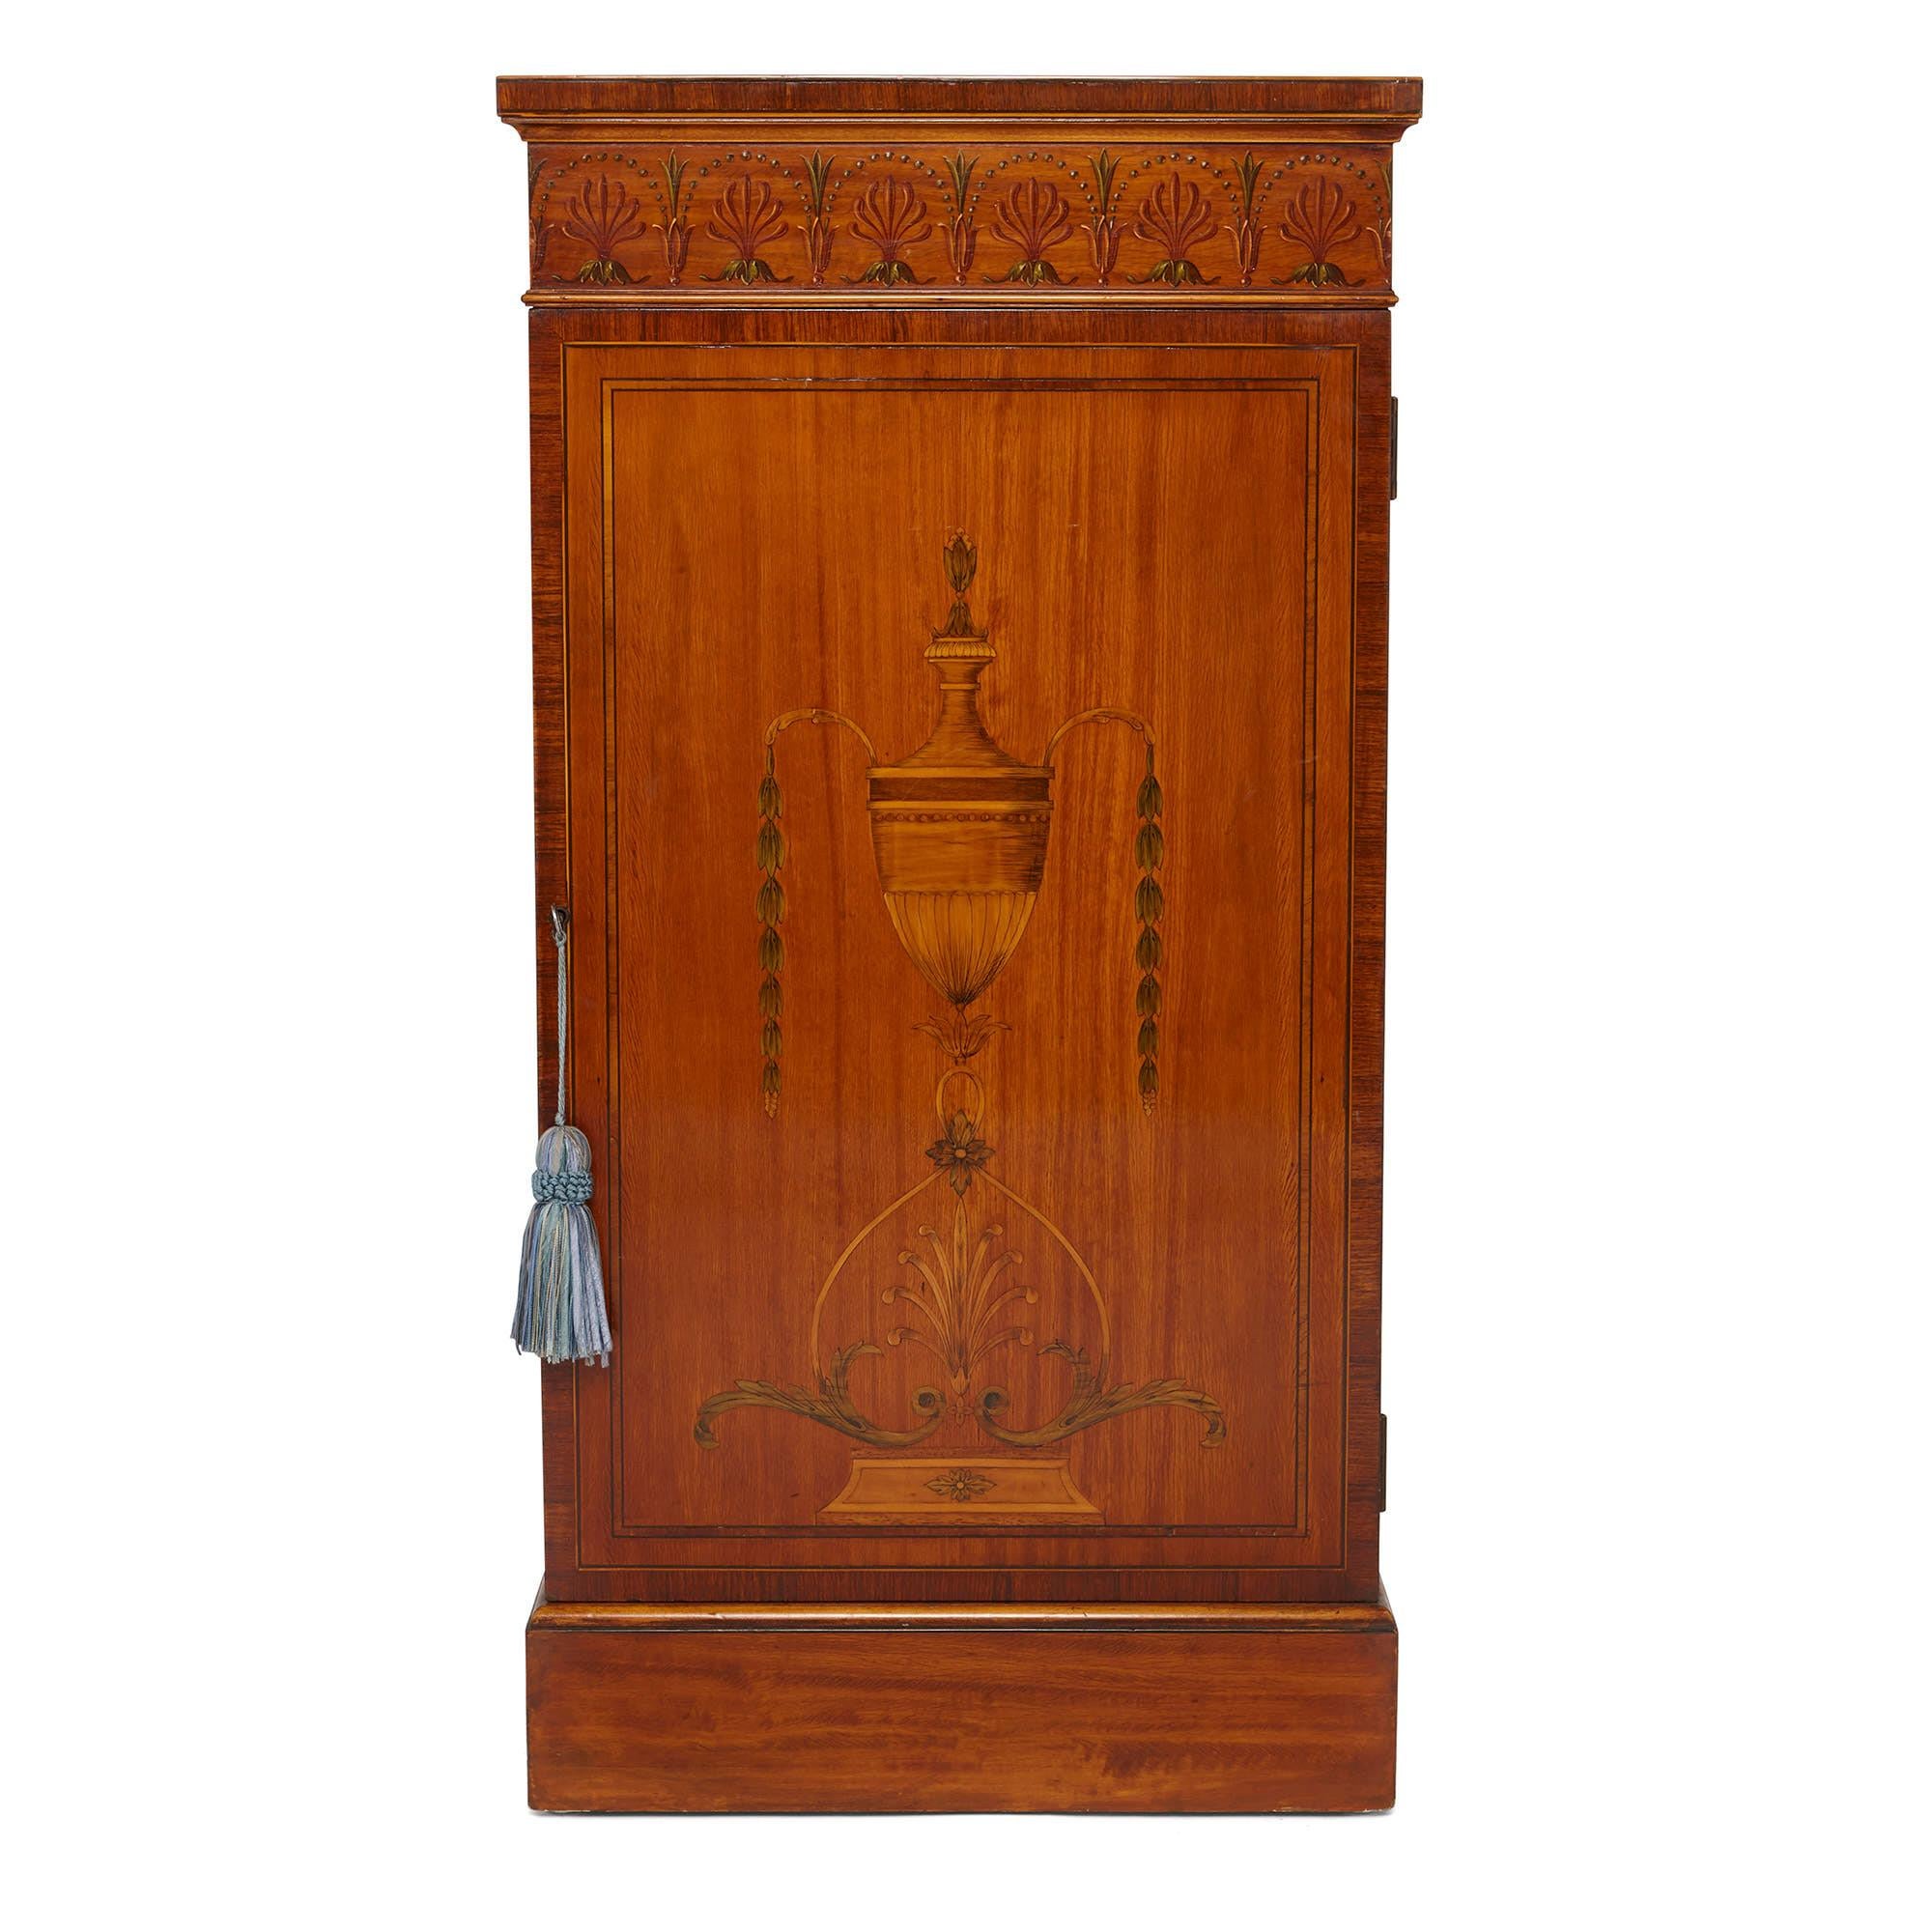 These beautiful cabinets are designed in the style of furniture produced in England in the Georgian period (1714-circa 1830-1837). The Georgian style is characterised by its restrained and elegant use of neoclassical forms and motifs.

The